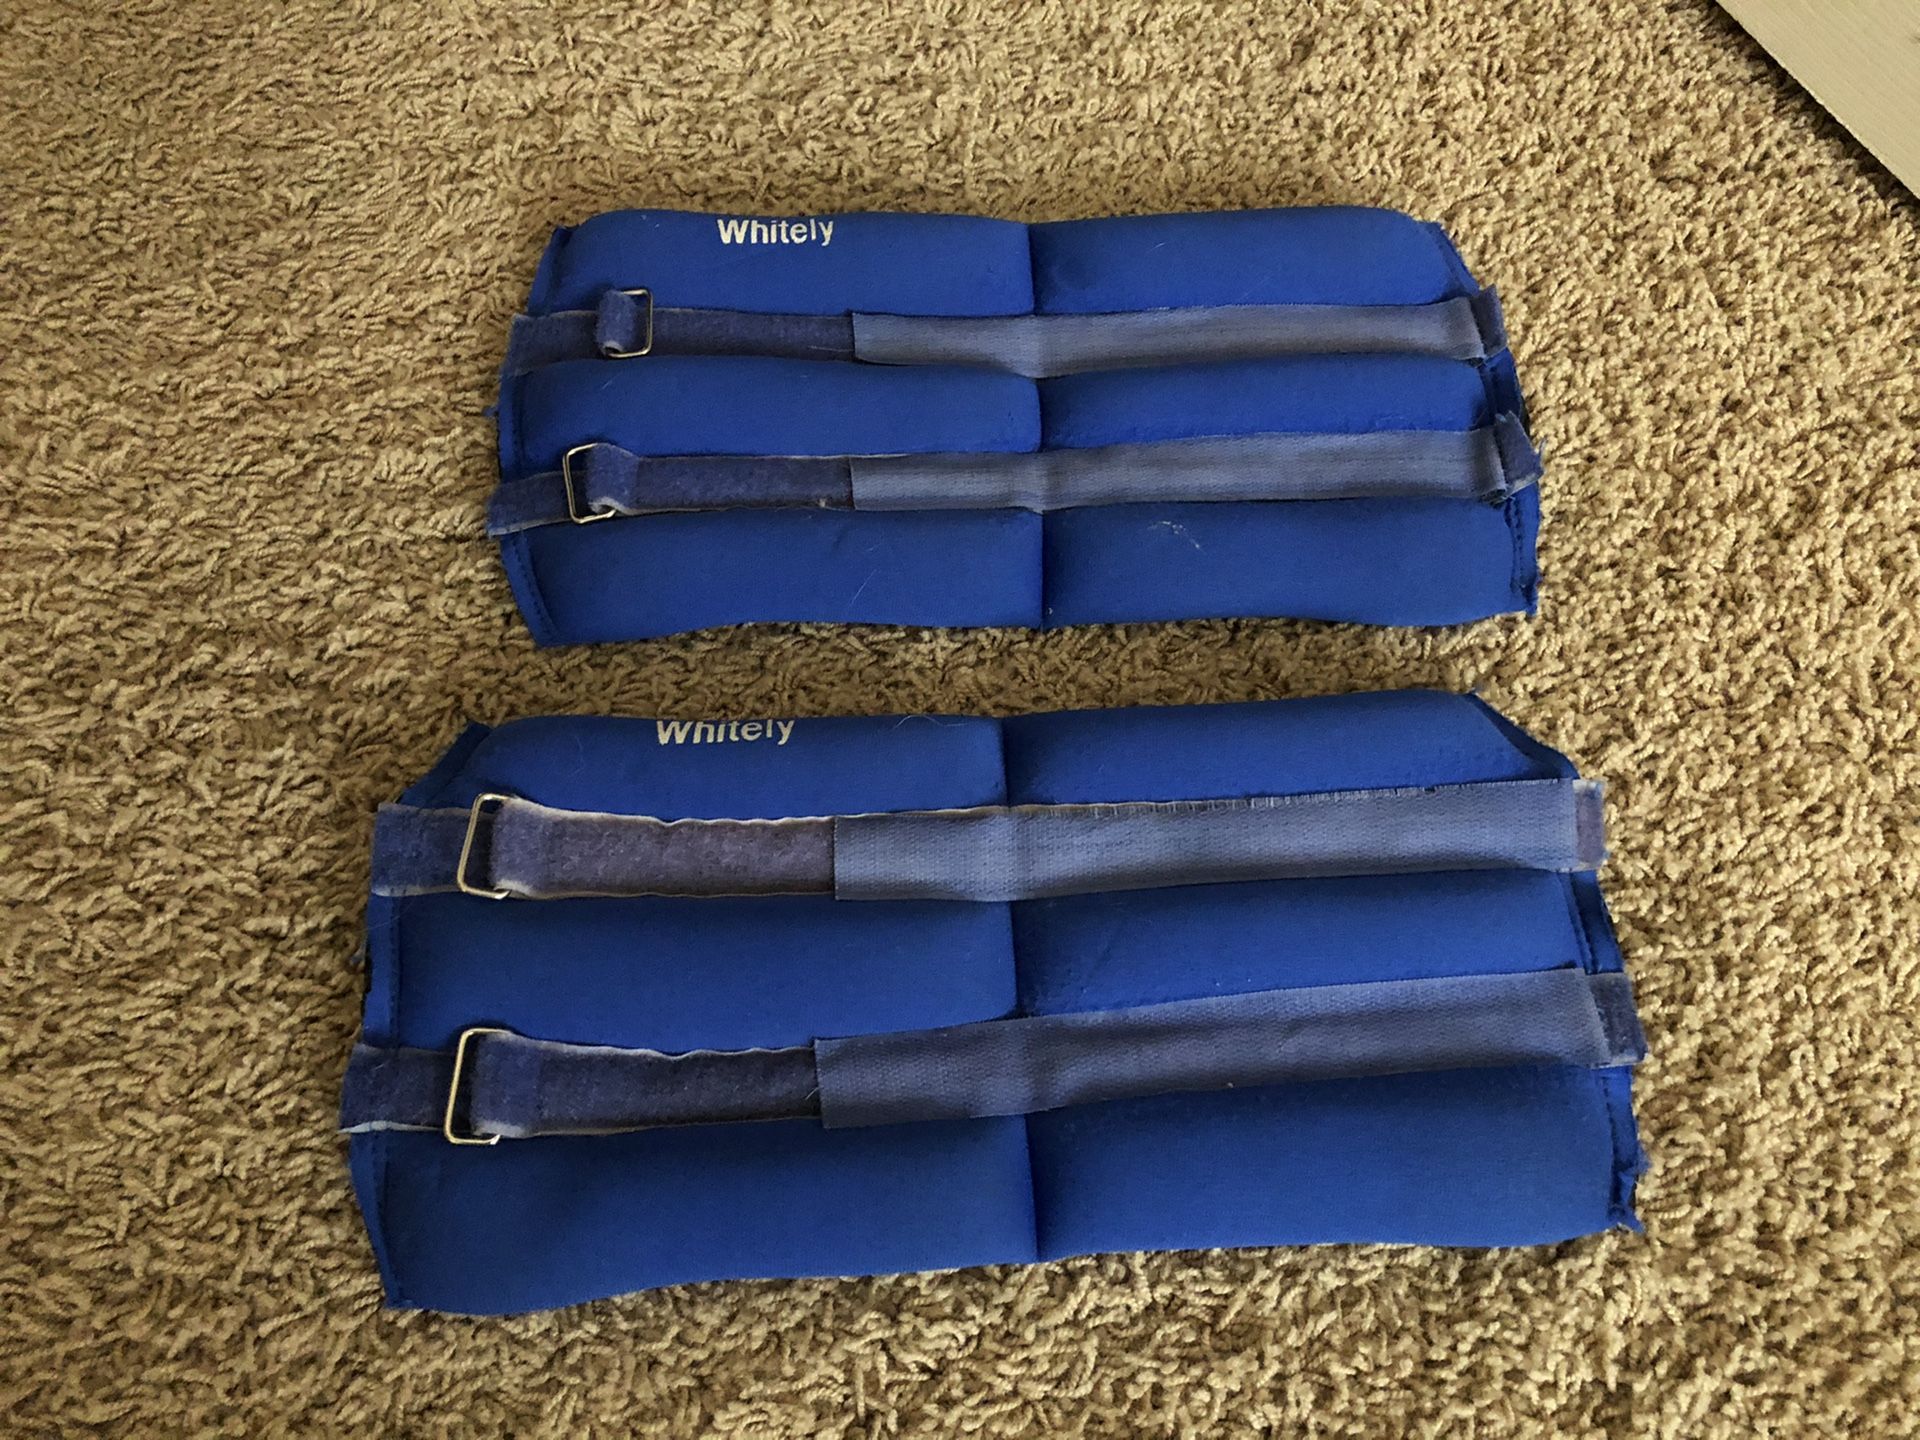 Ankle Weights - Made by Whitely - 5lbs each